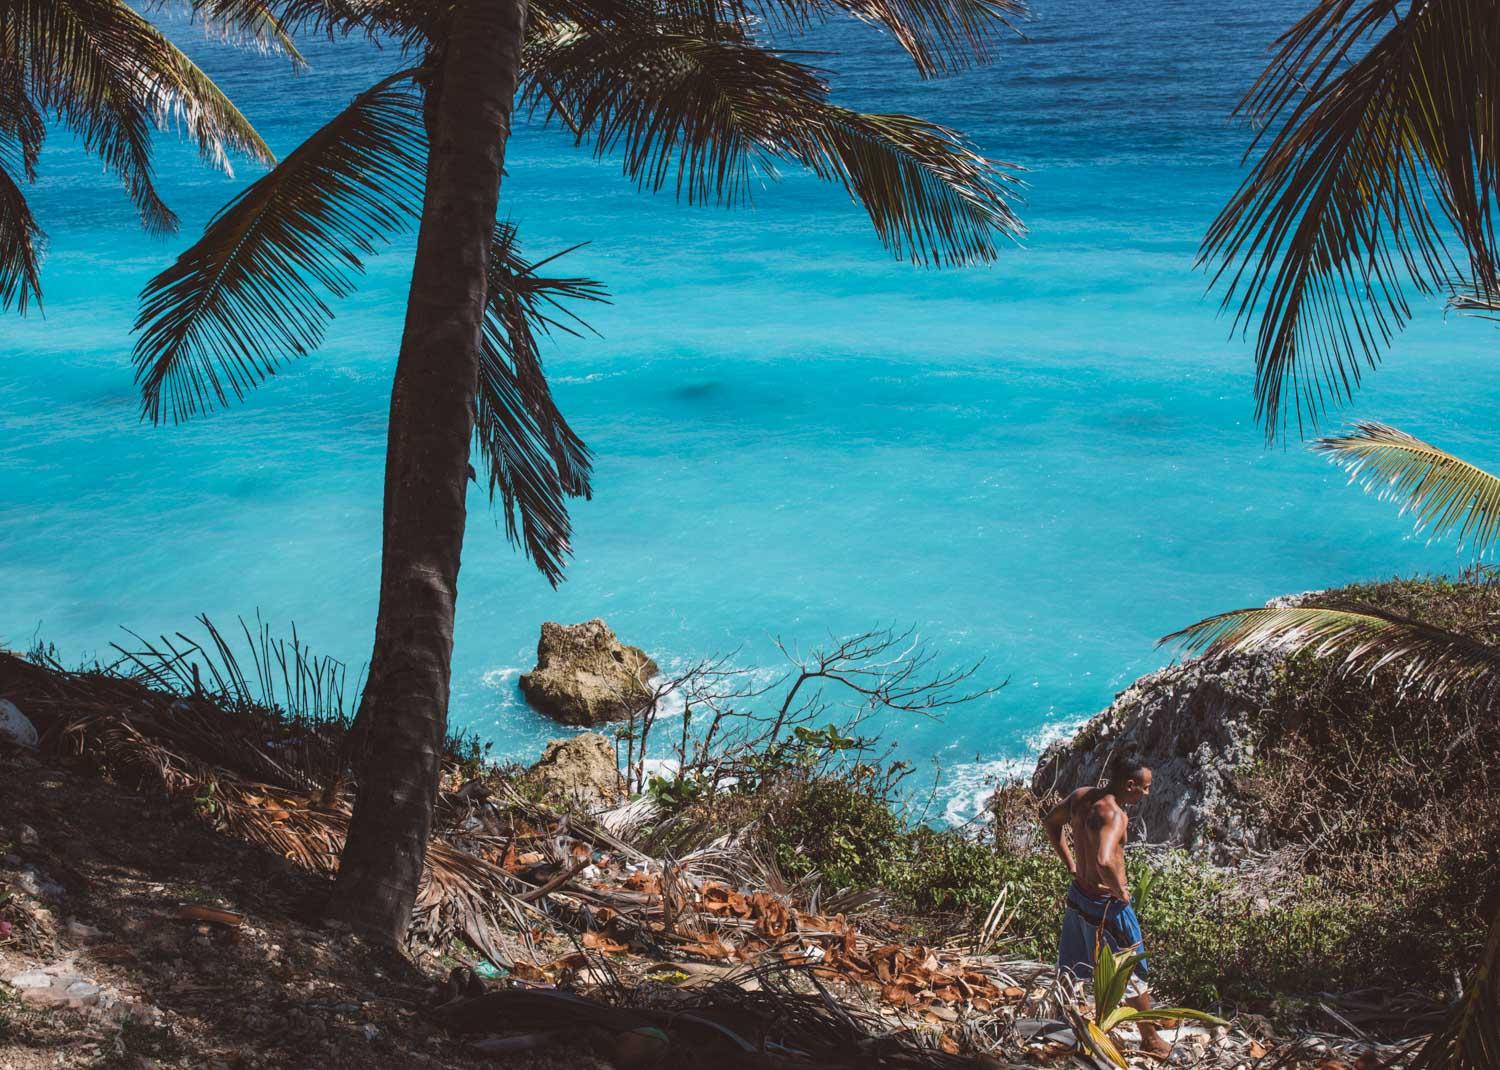 Admiring the cyan-cerulean blue color of the Barahona beaches from the side of a mountain.